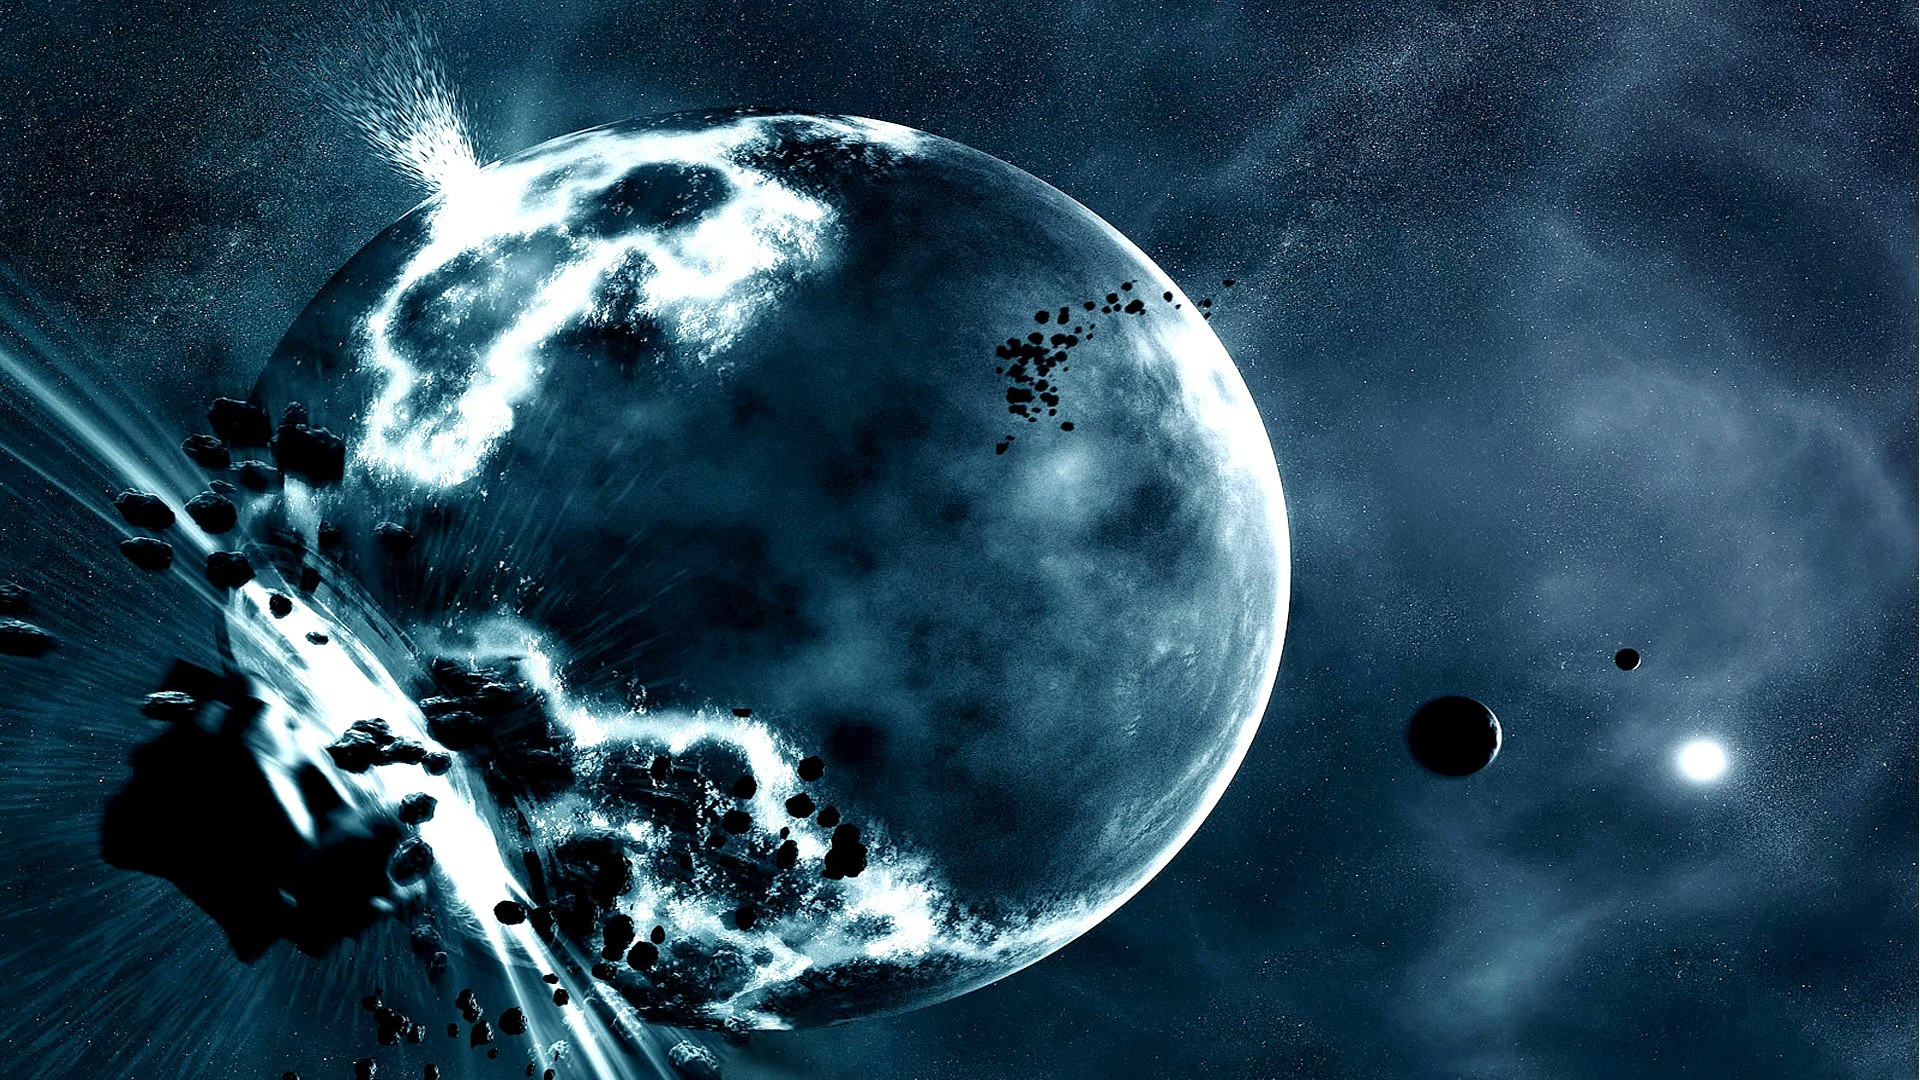 General 1920x1080 science fiction digital art space apocalyptic space art planet